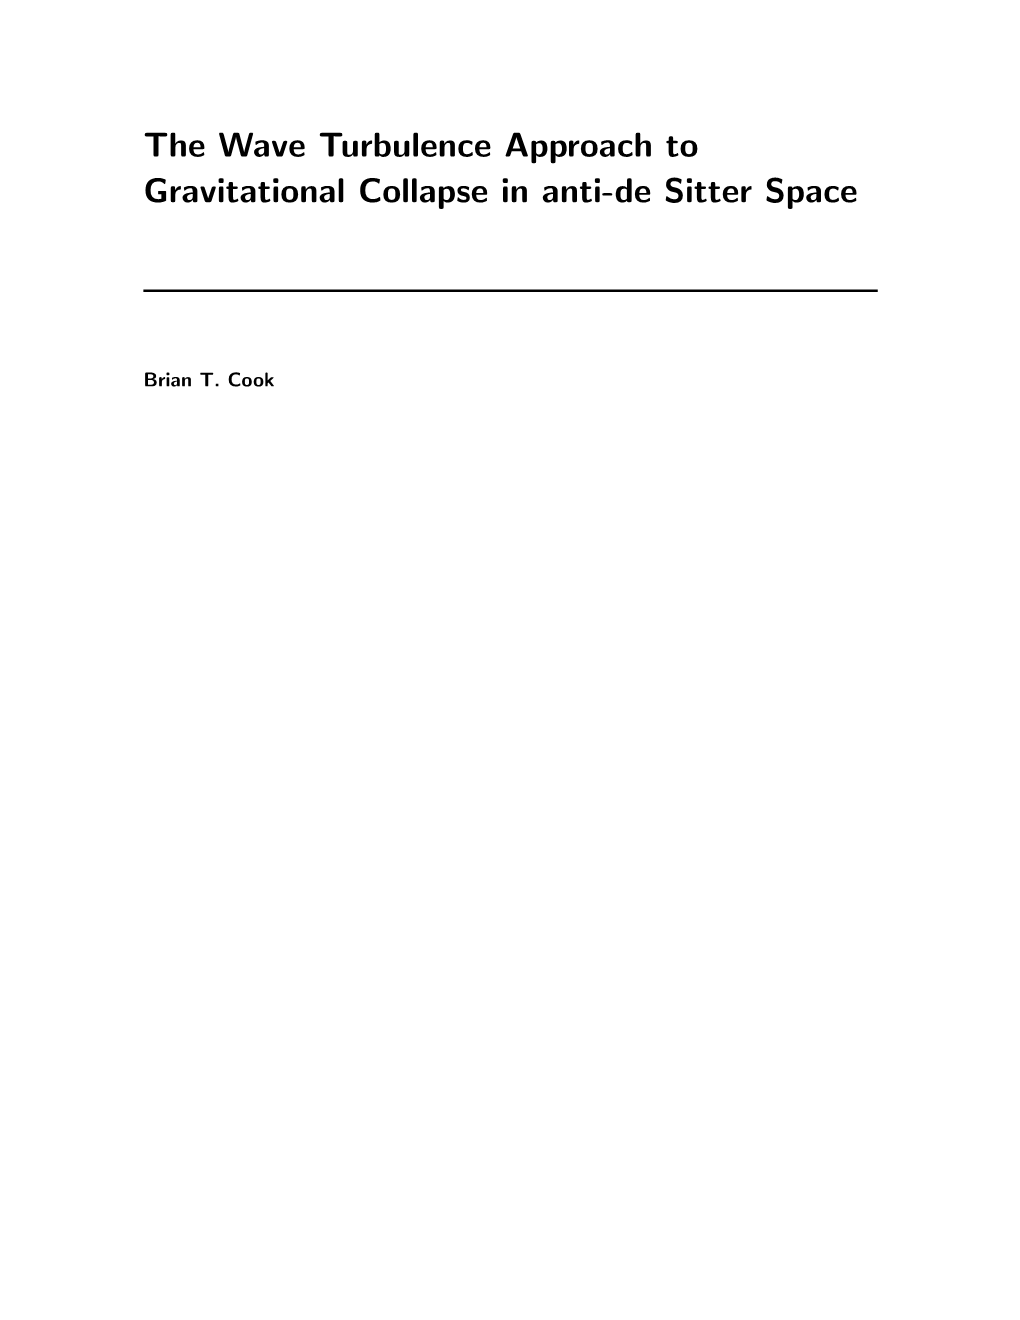 The Wave Turbulence Approach to Gravitational Collapse in Anti-De Sitter Space